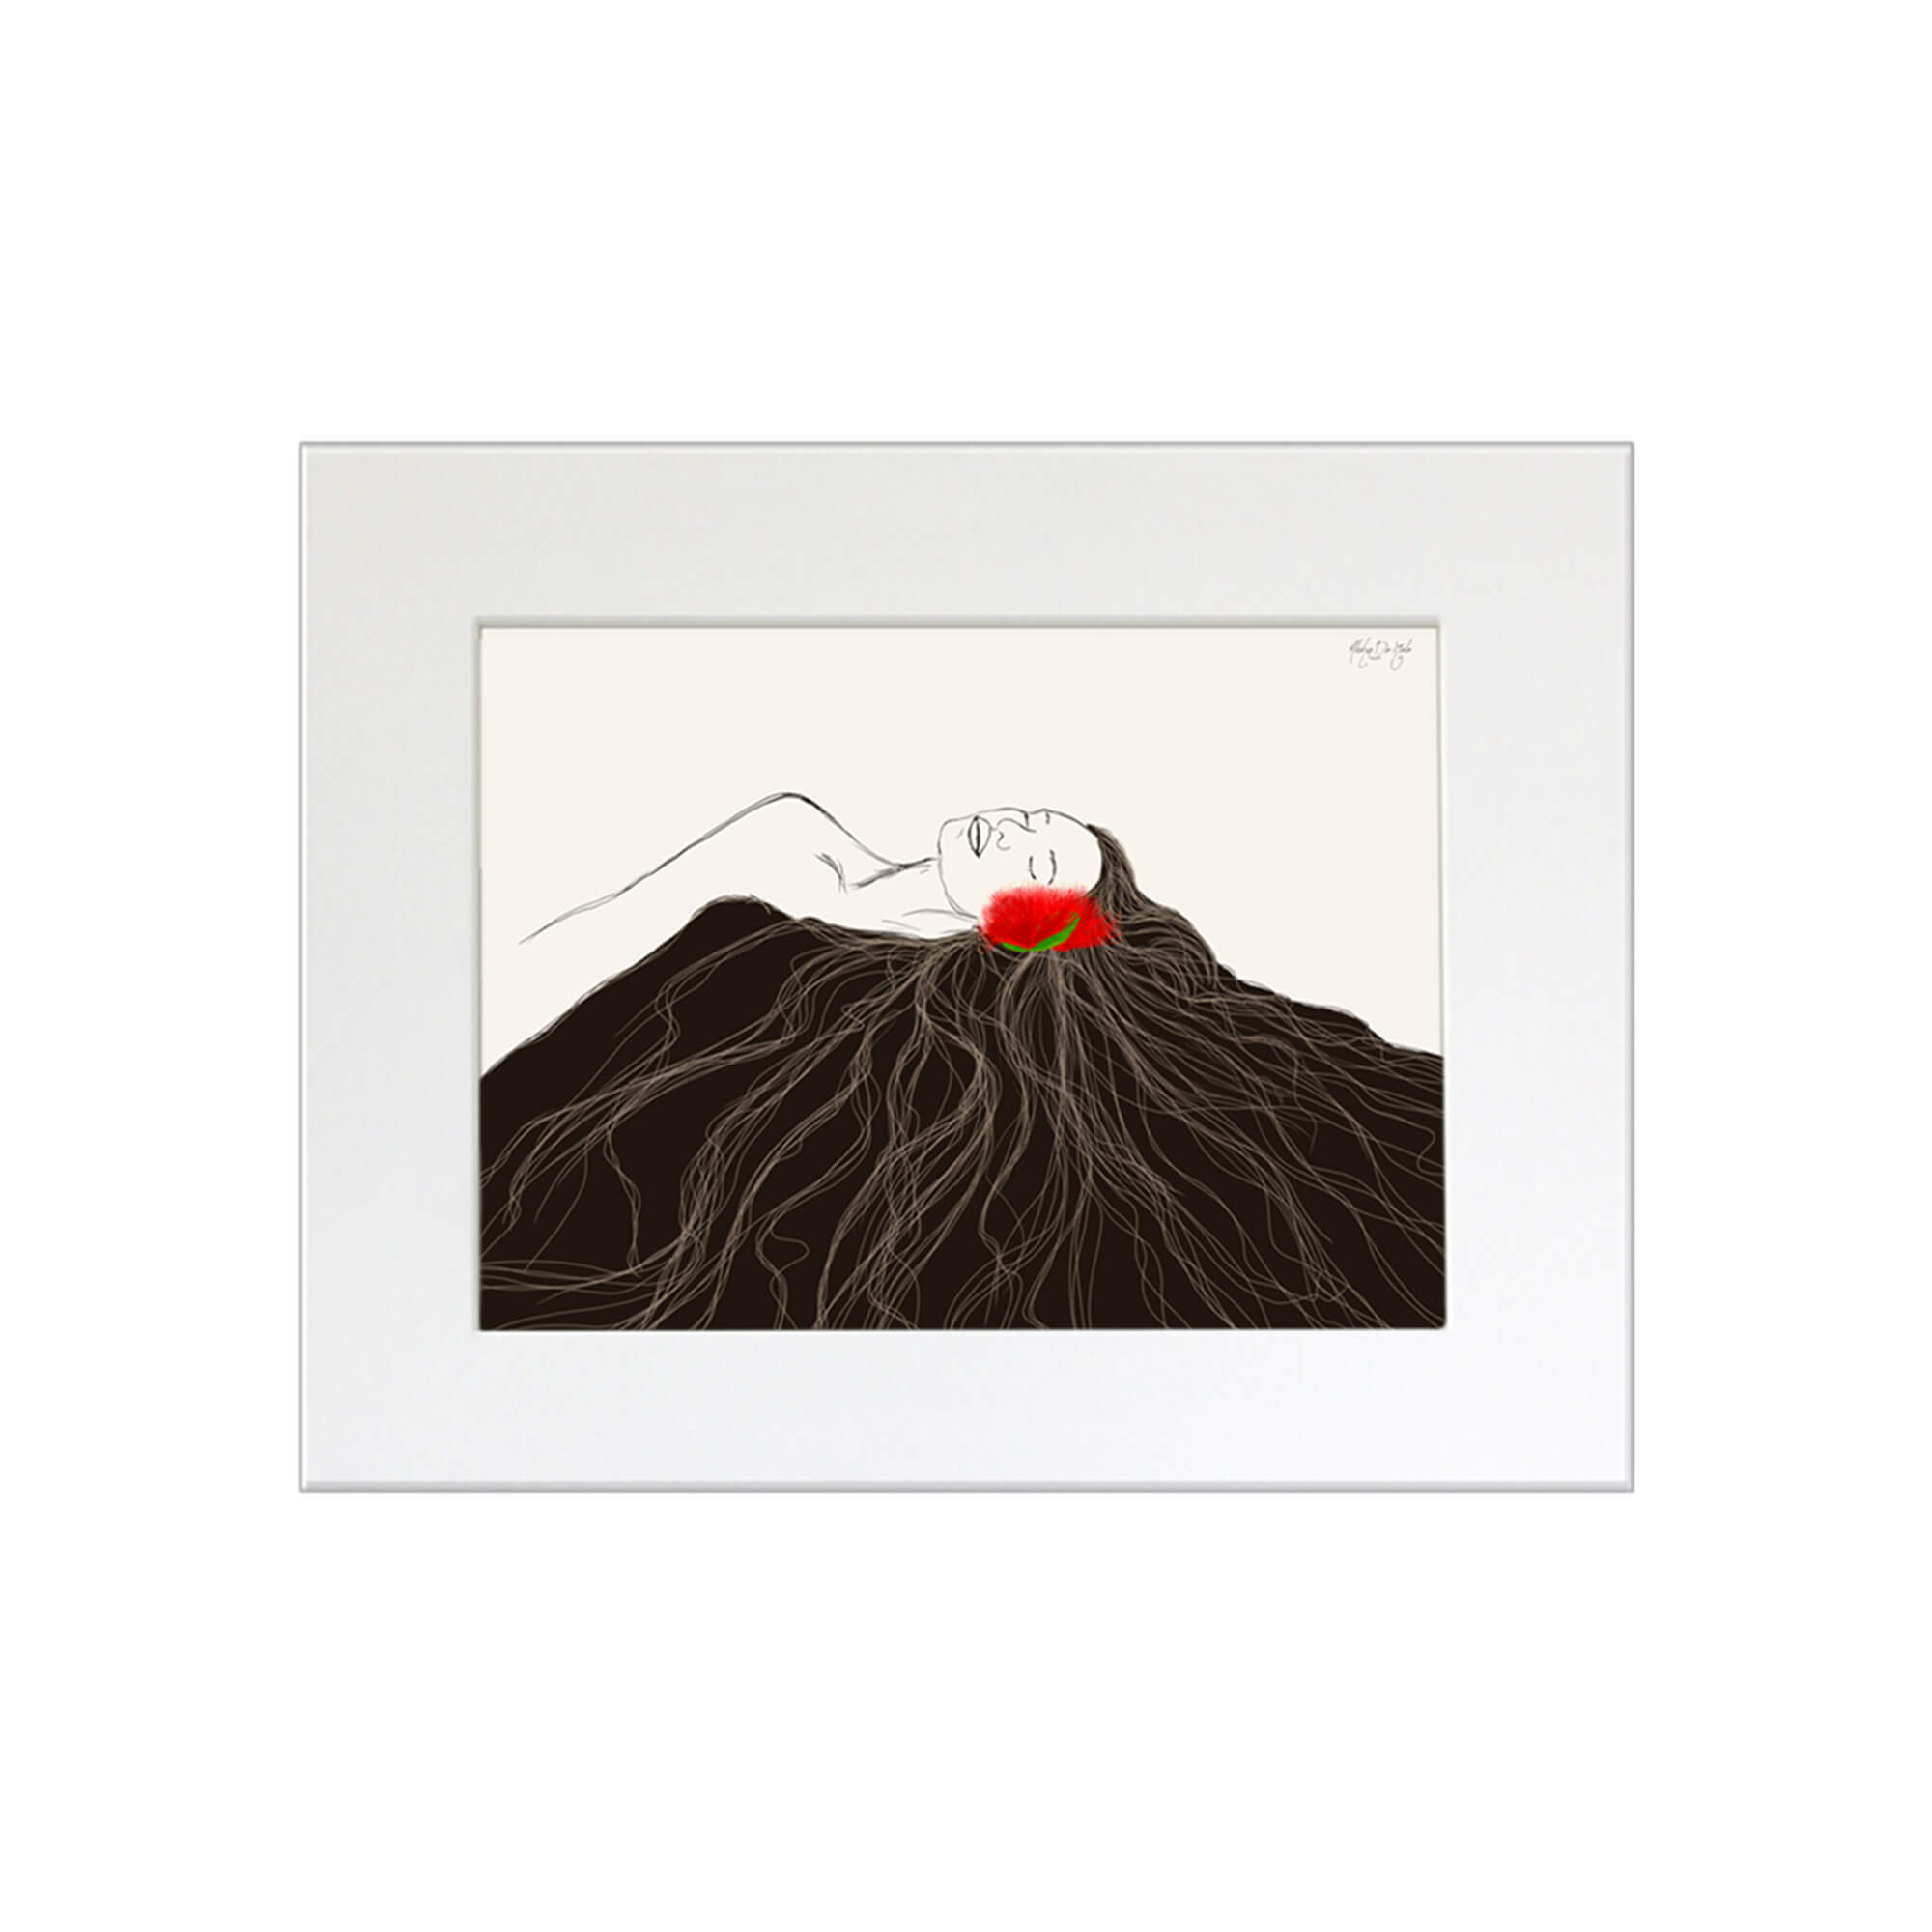 A matted art print of a woman with a vibrant red flower by Hawaii artist Aloha De Mele